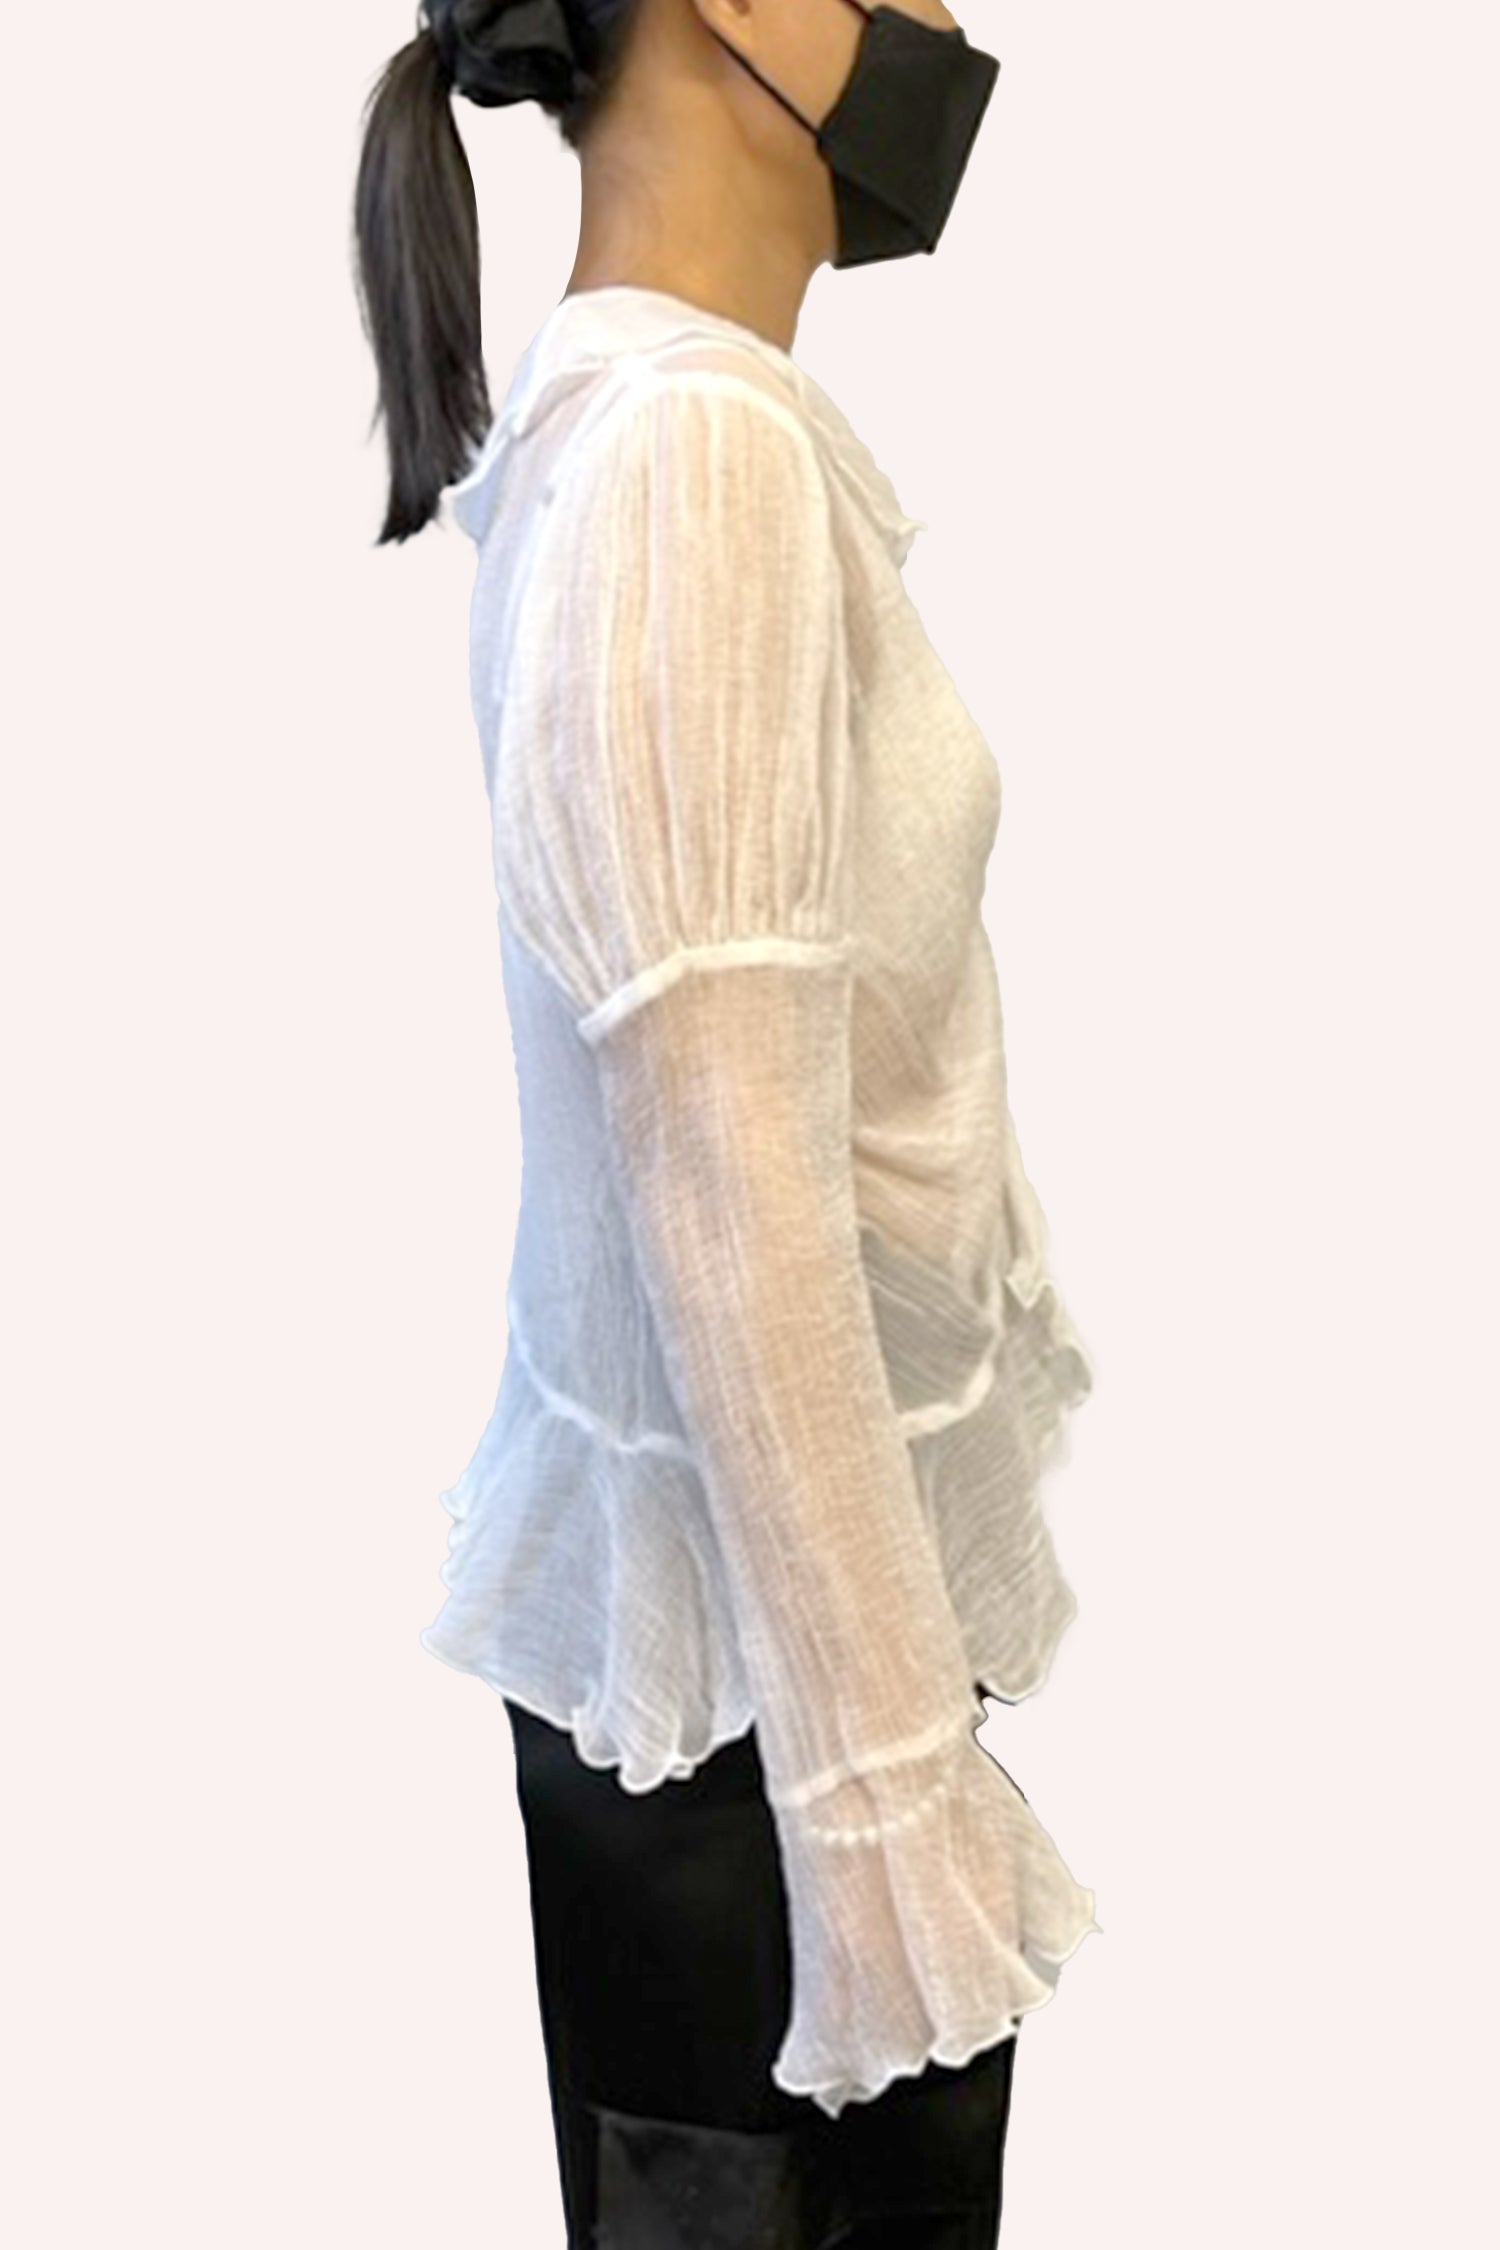 The top of the sleeves with billowy style, bottom of sleeves covers the hands with a ruffle effect